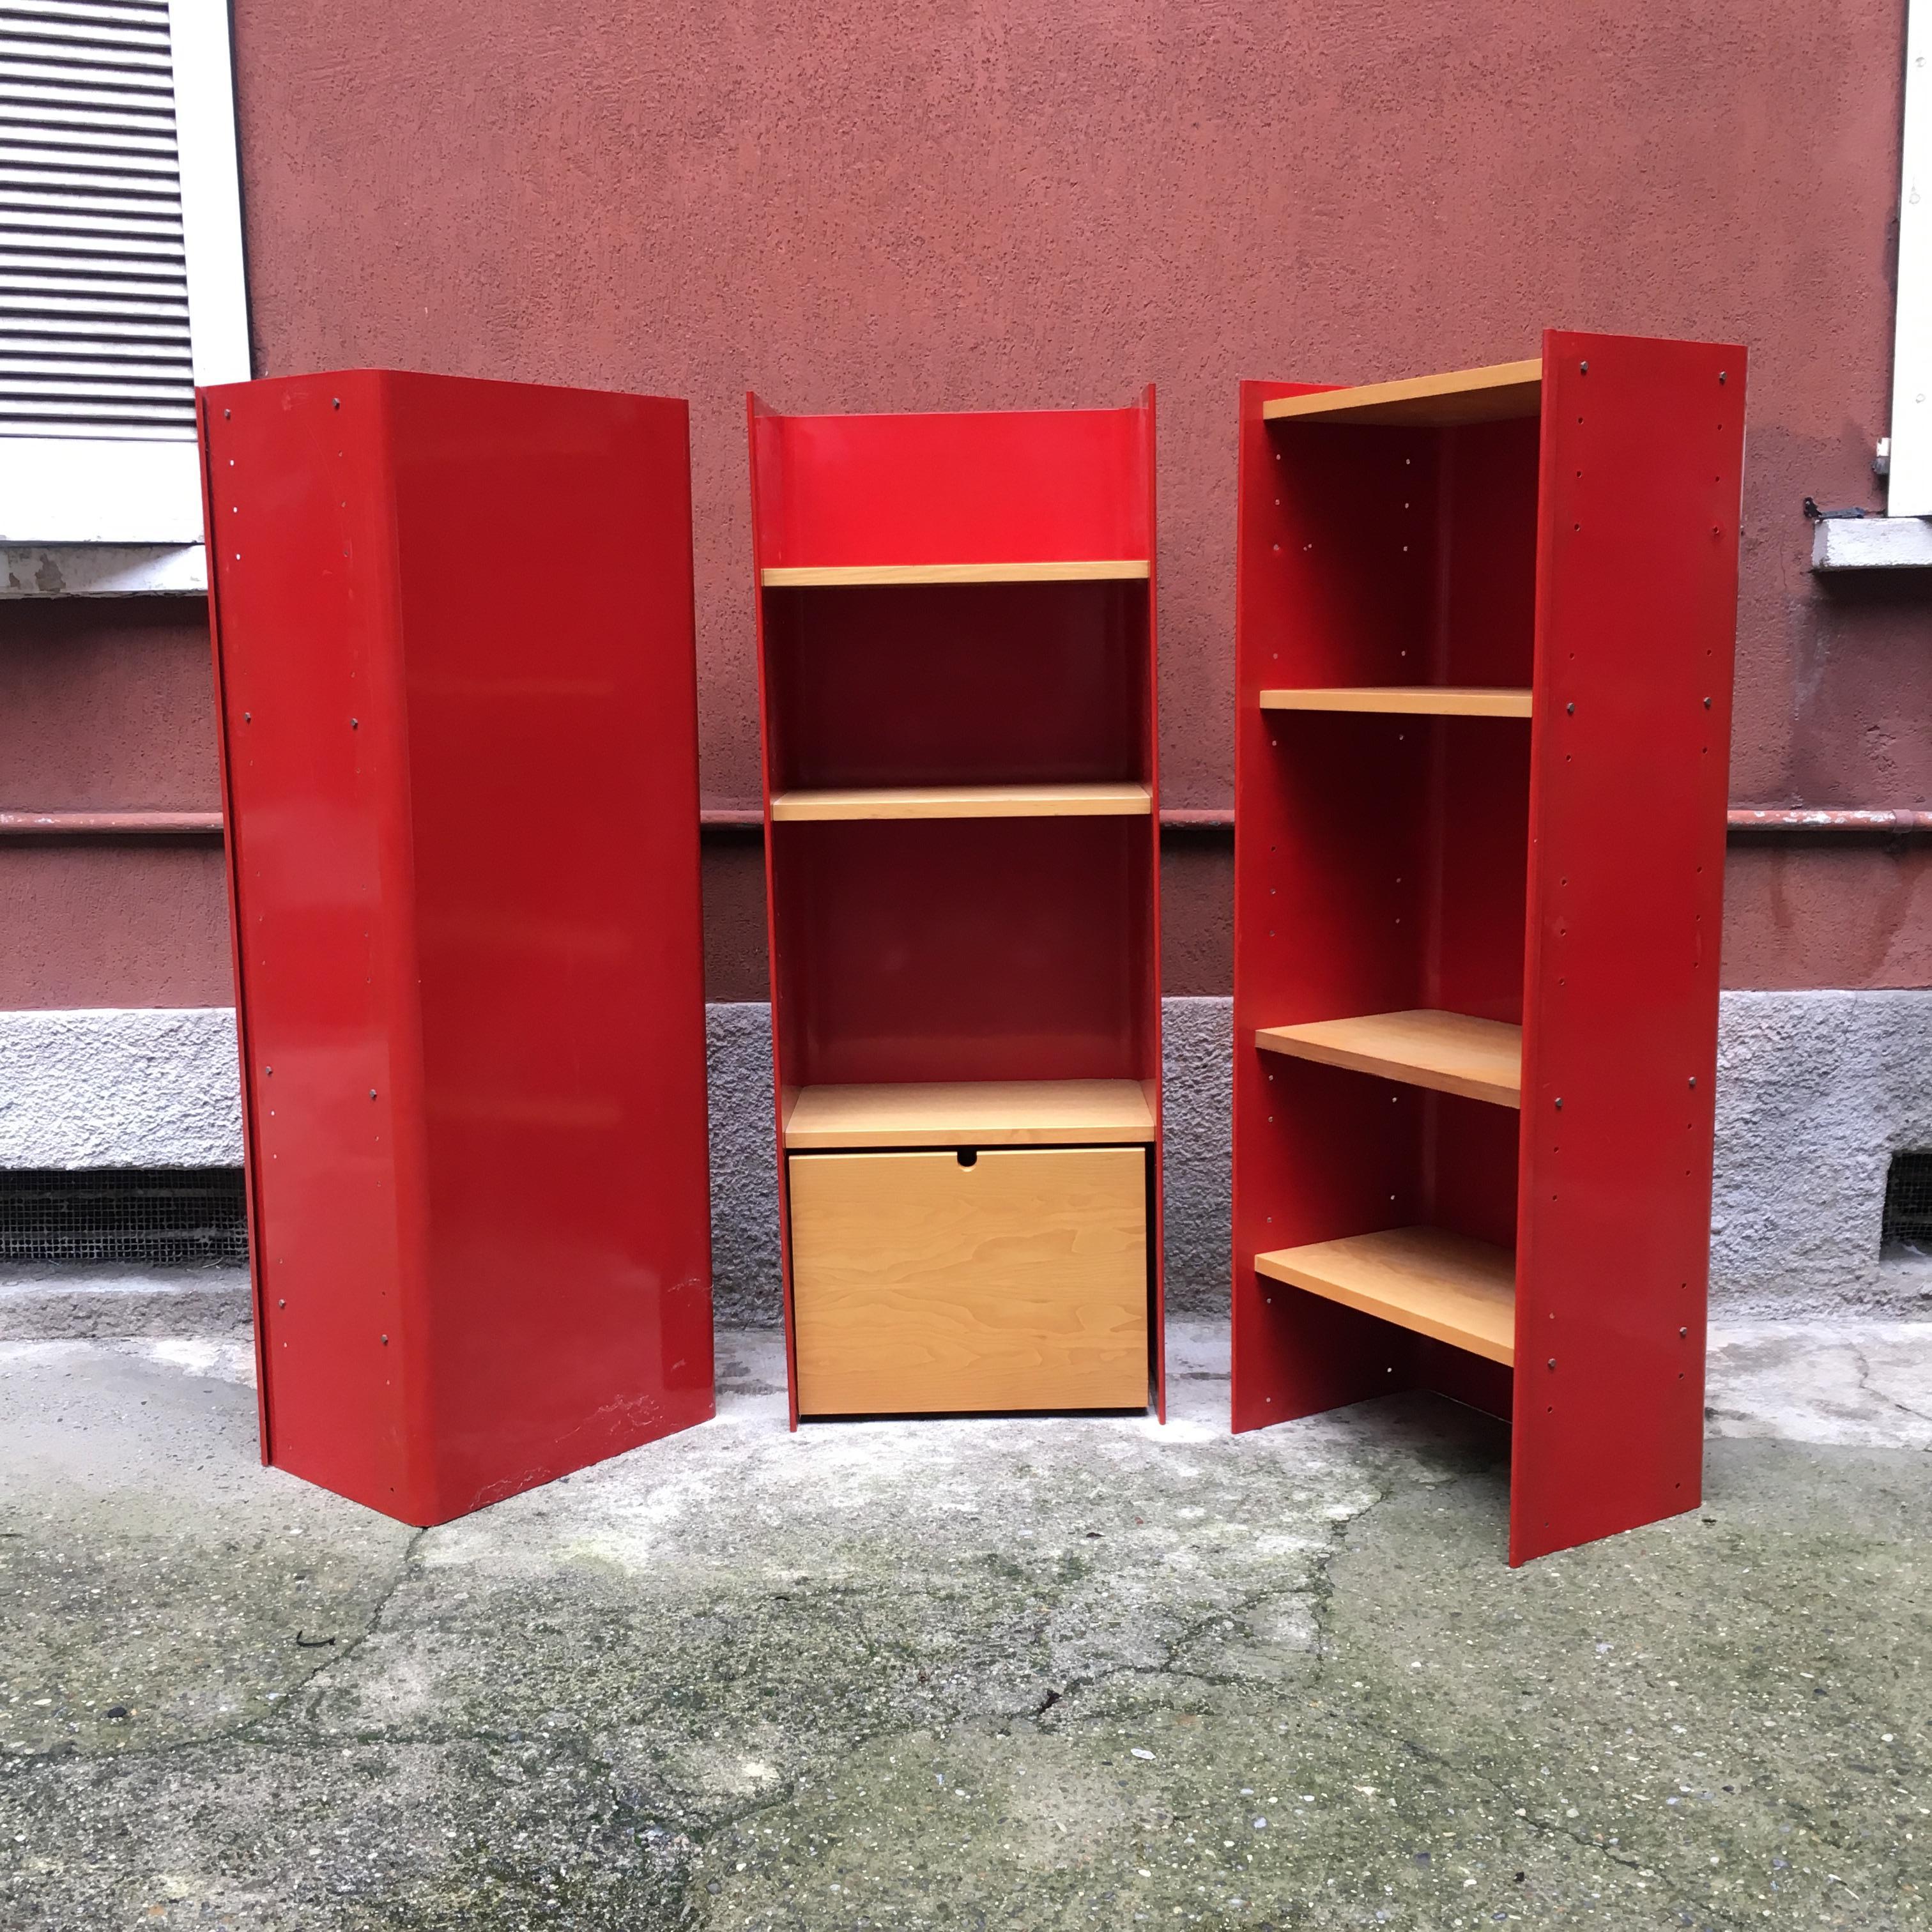 Italian freestanding red enameled metal bookcase by Arflex, 1970s
Freestanding bookcase with curved and glossy red enameled metal frame, with solid wood shelves and removable central drawer on wheels
Produced by Arflex, circa 1970
Perfect